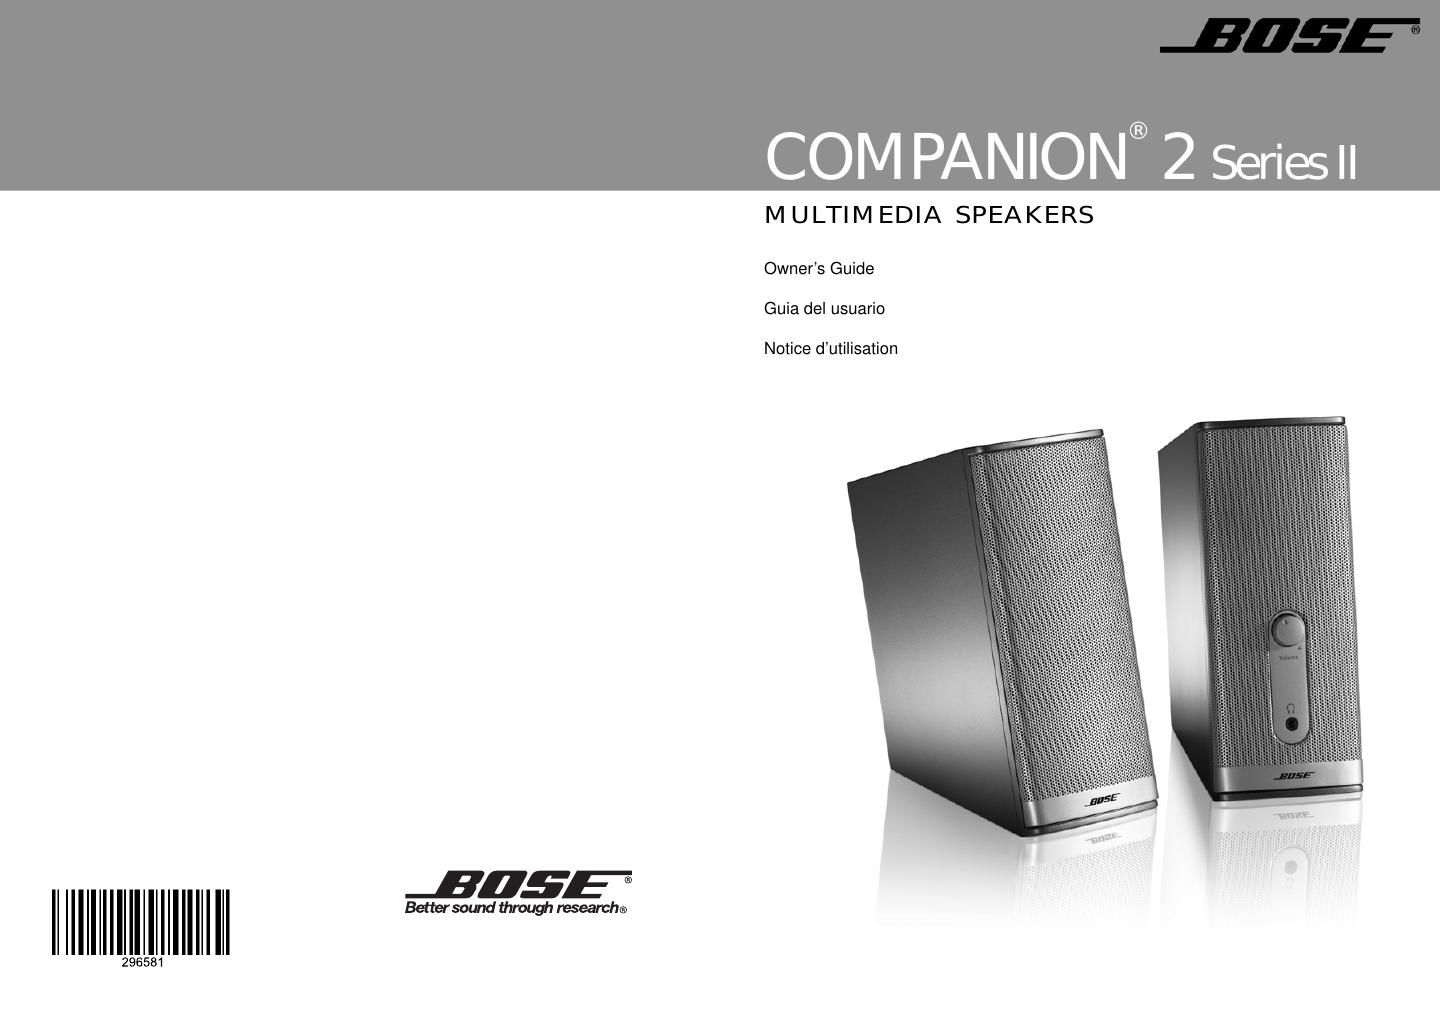 bose companion 2 series ii owners guide